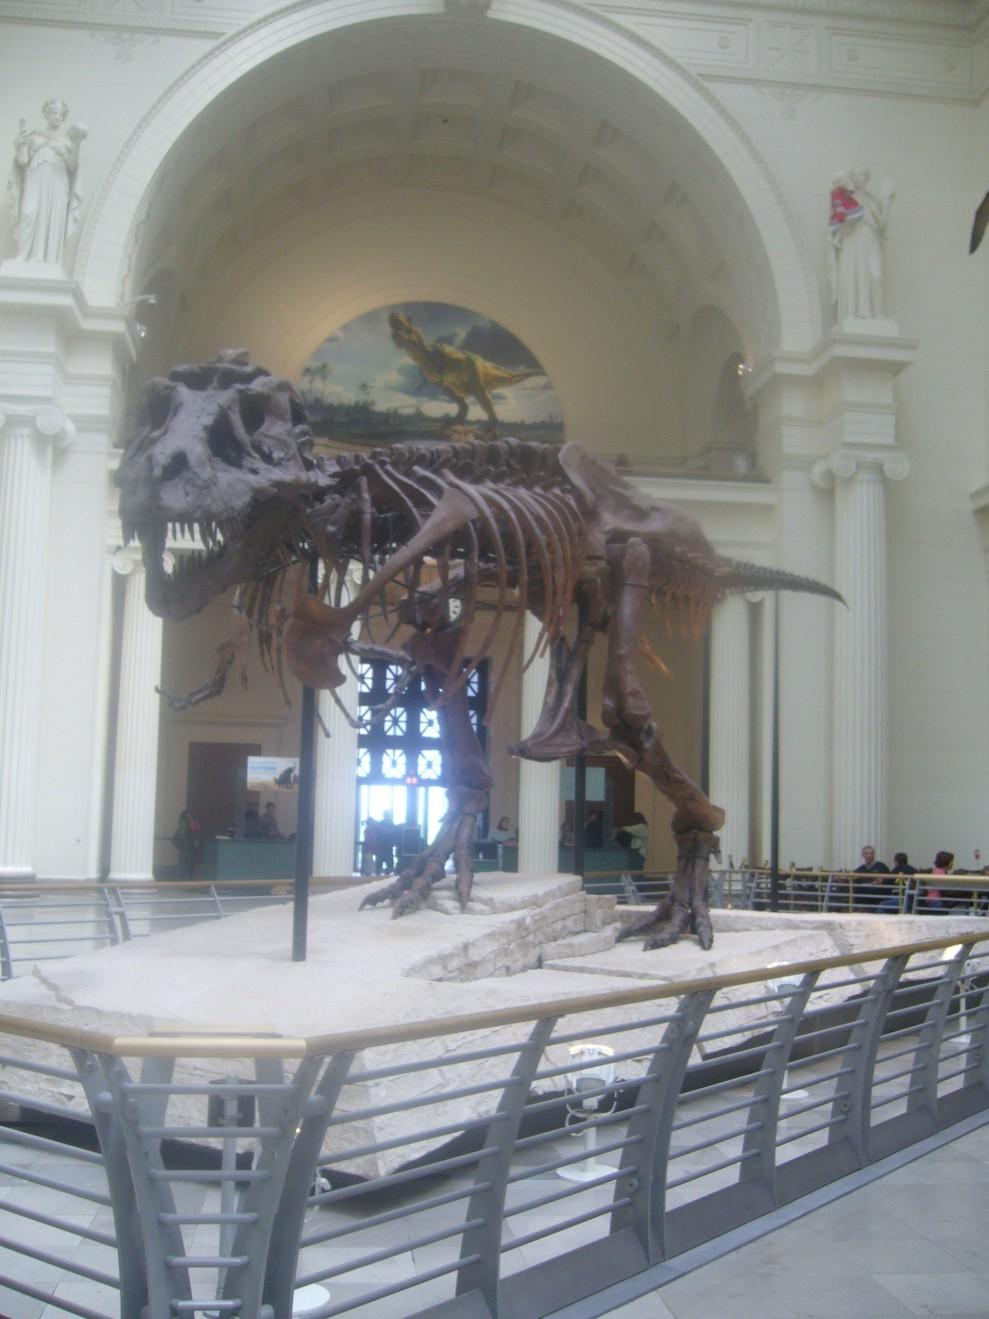 PICTURED BELOW, A LOOK INTO THE MAIN ENTRANCE OF THE FIELD MUSEUM. WHEN WE WERE FINISHED AT THE FIELD MUSEUM, EVERY- ONE COULD CHOOSE WHAT THEY WANTED TO SEE IN THE AFTERNOON.